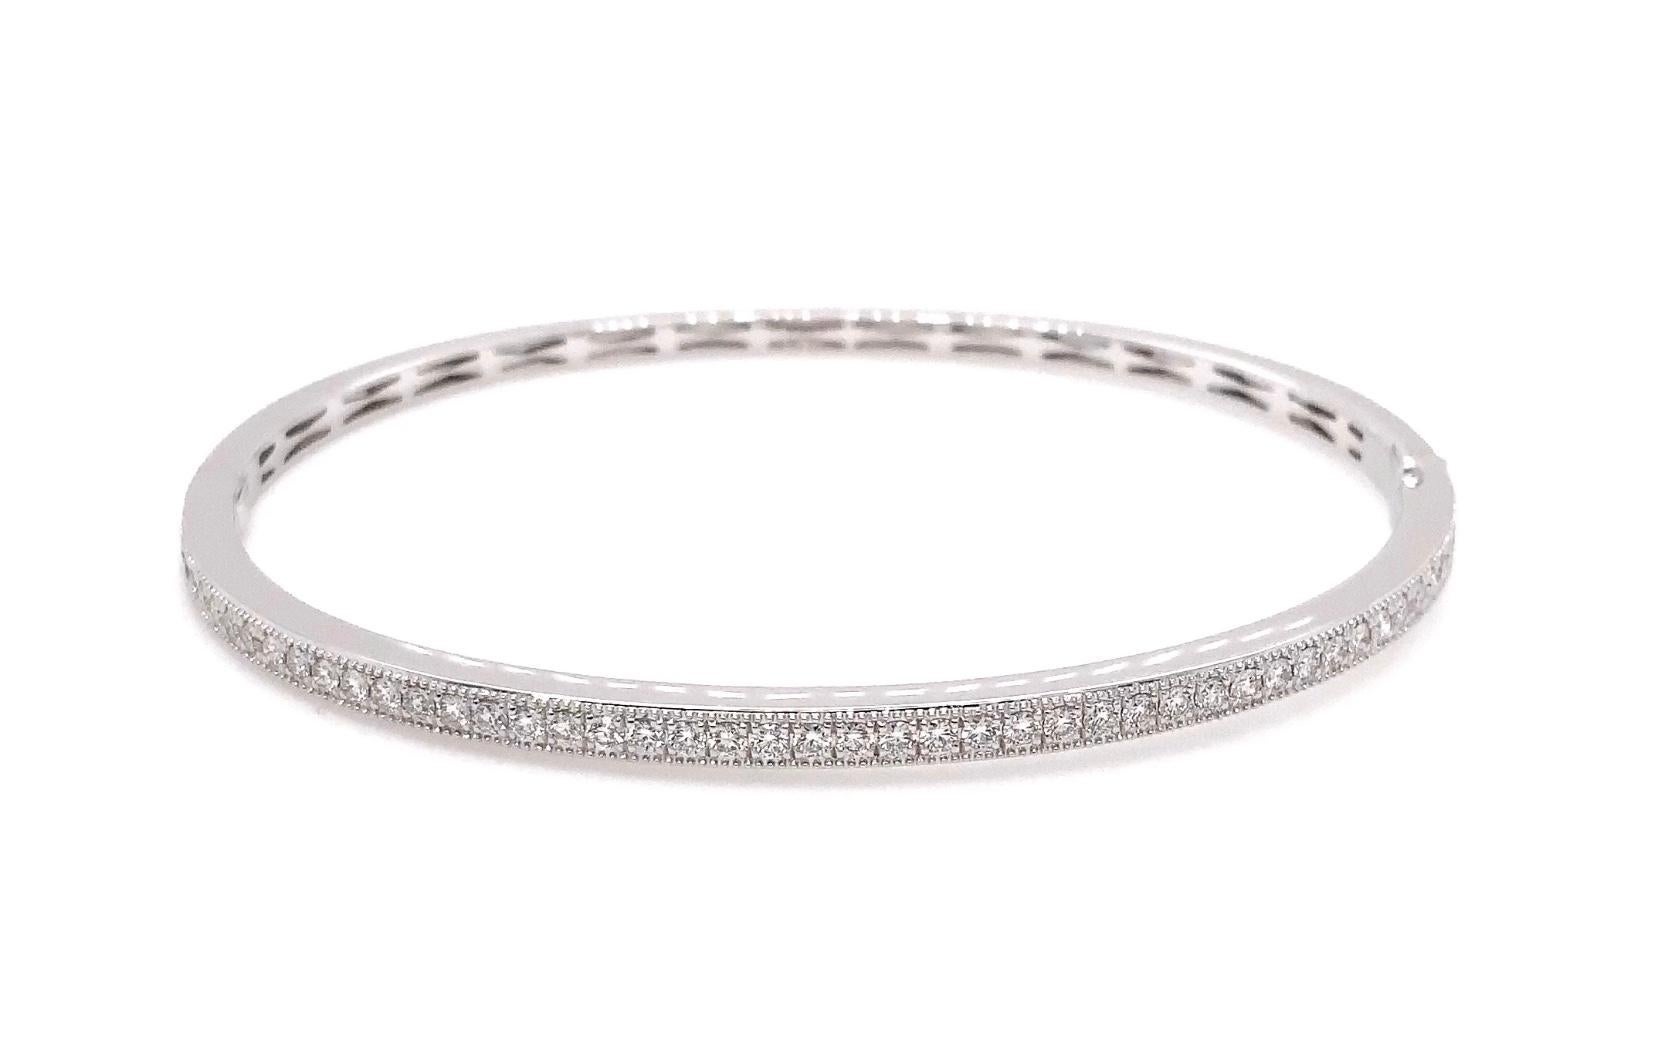 This Memoire Milgrain Hinge Bangle is crafted from 18K White Gold and is adorned with 46 Round Brilliant Cut Diamonds totaling 0.76 carats. With a width of 3 millimeters and a wrist diameter of 2.5 inches, this bangle weighs 10.6 grams, adding an